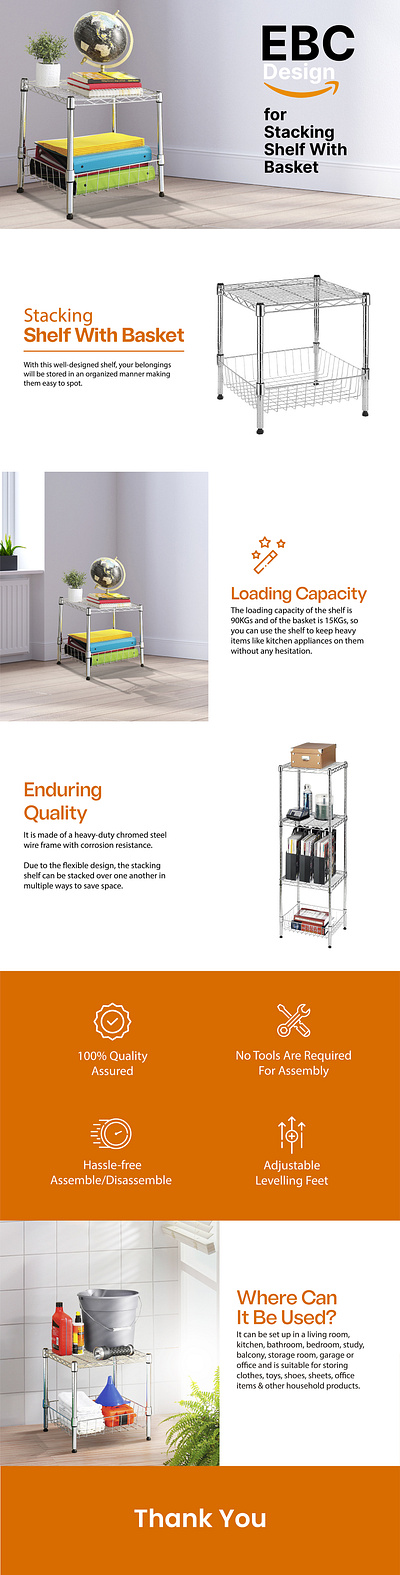 EBC Design for Stacking Shelf With Basket a amazon a listing amazon amazon a amazon a design amazon content amazon content design amazon ebc amazon ebc design amazon listing brand branding design designing ebc ebc design enhanced brand content graphic design illustration visual identity